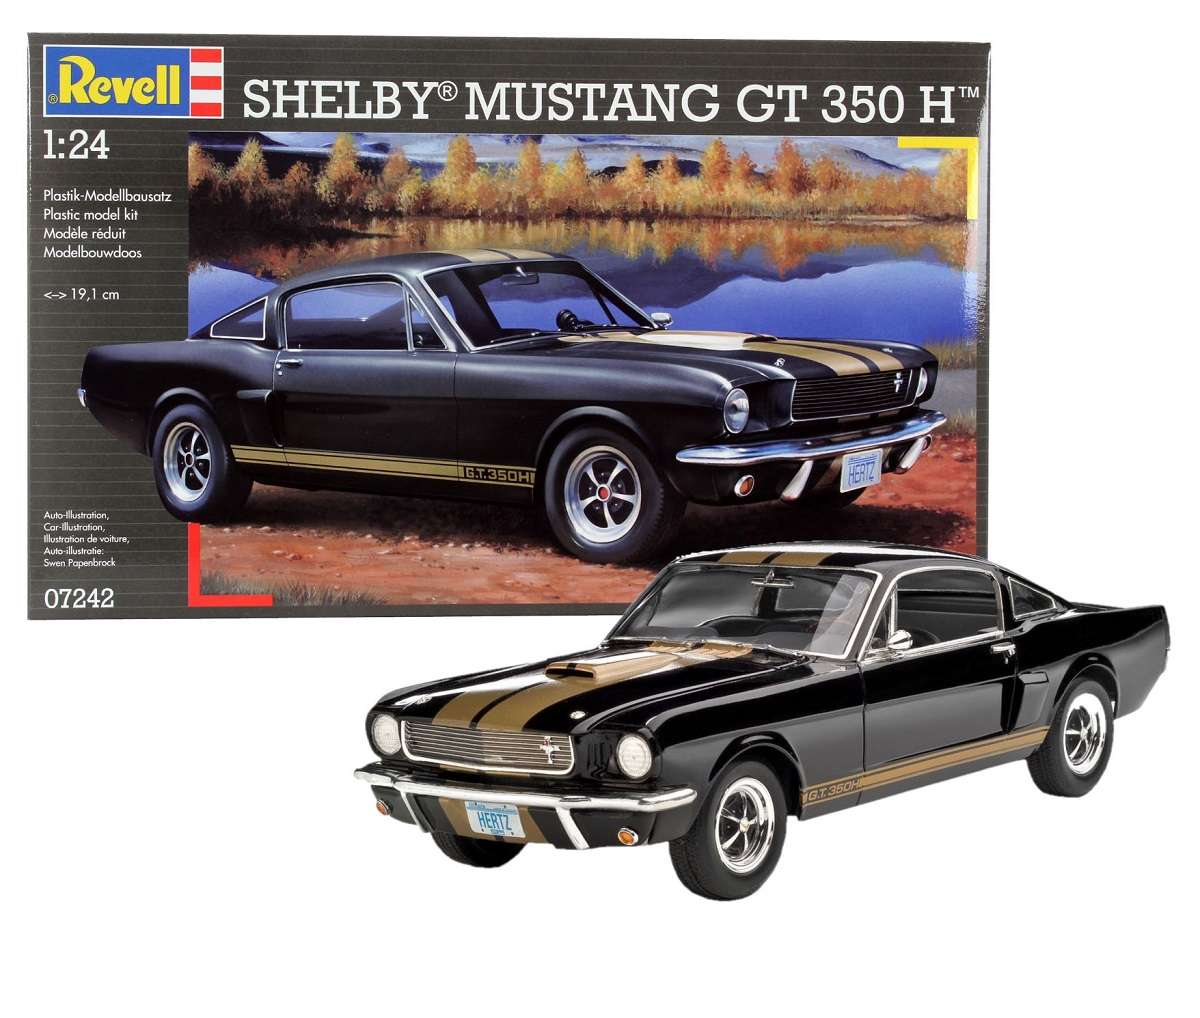 Revell Cars Shelby Mustang GT 350 H 1:24 07242